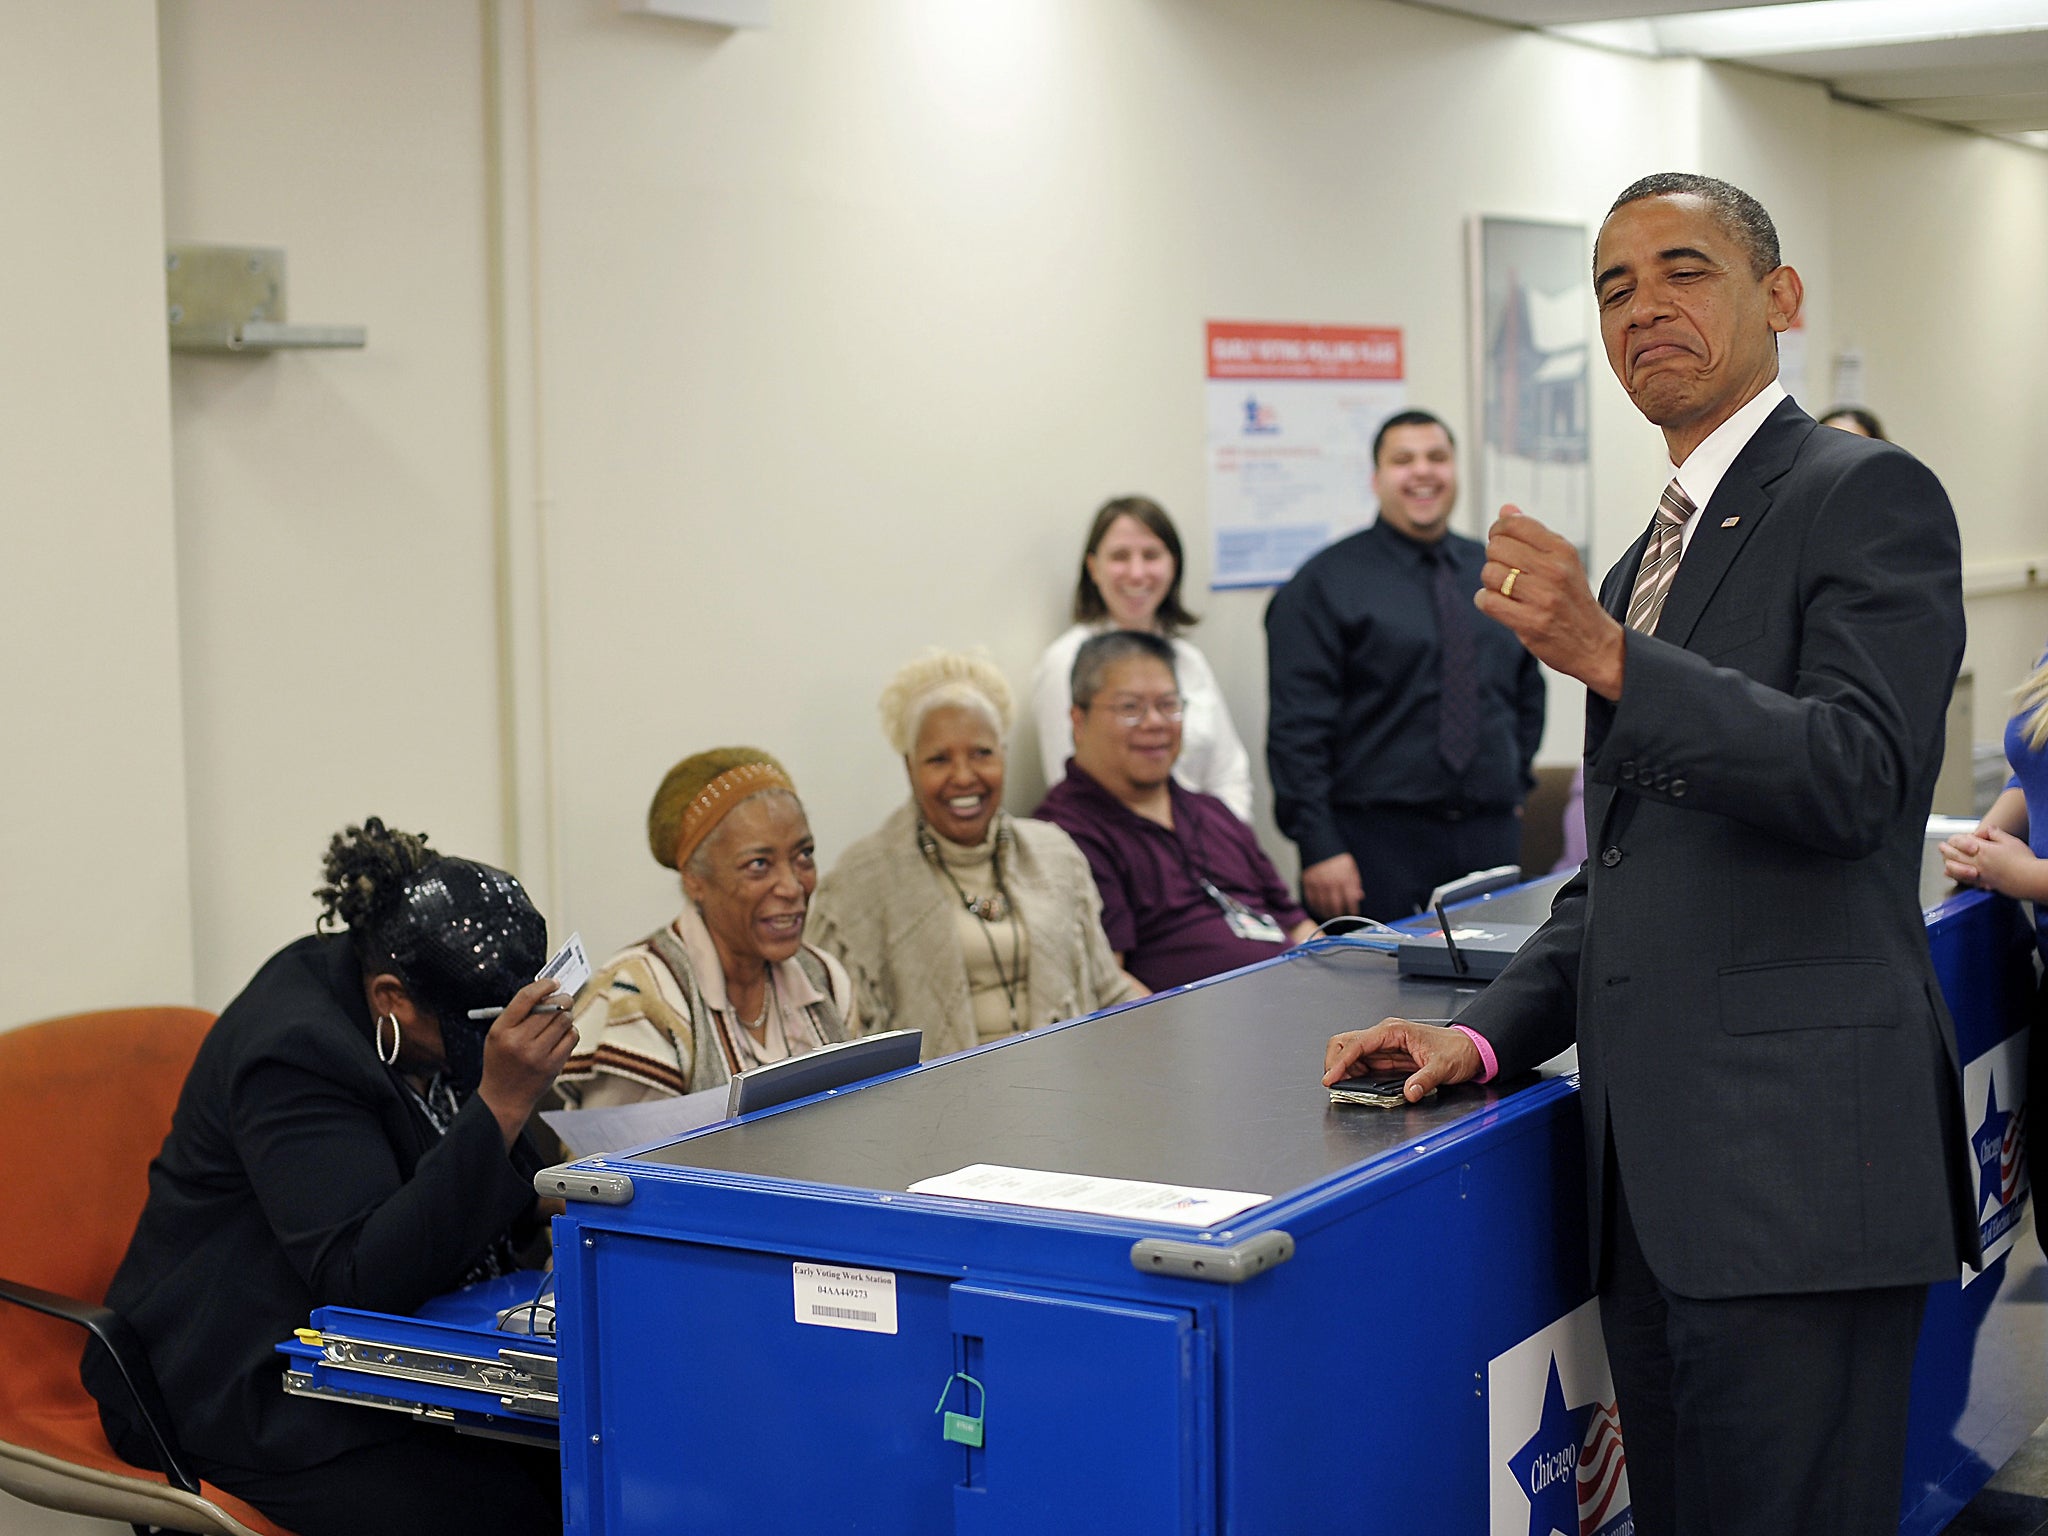 Barack Obama jokes with election worker Marie Holmes (left) who double-checked his photo on his driver's licence as he signed in for early voting in Chicago